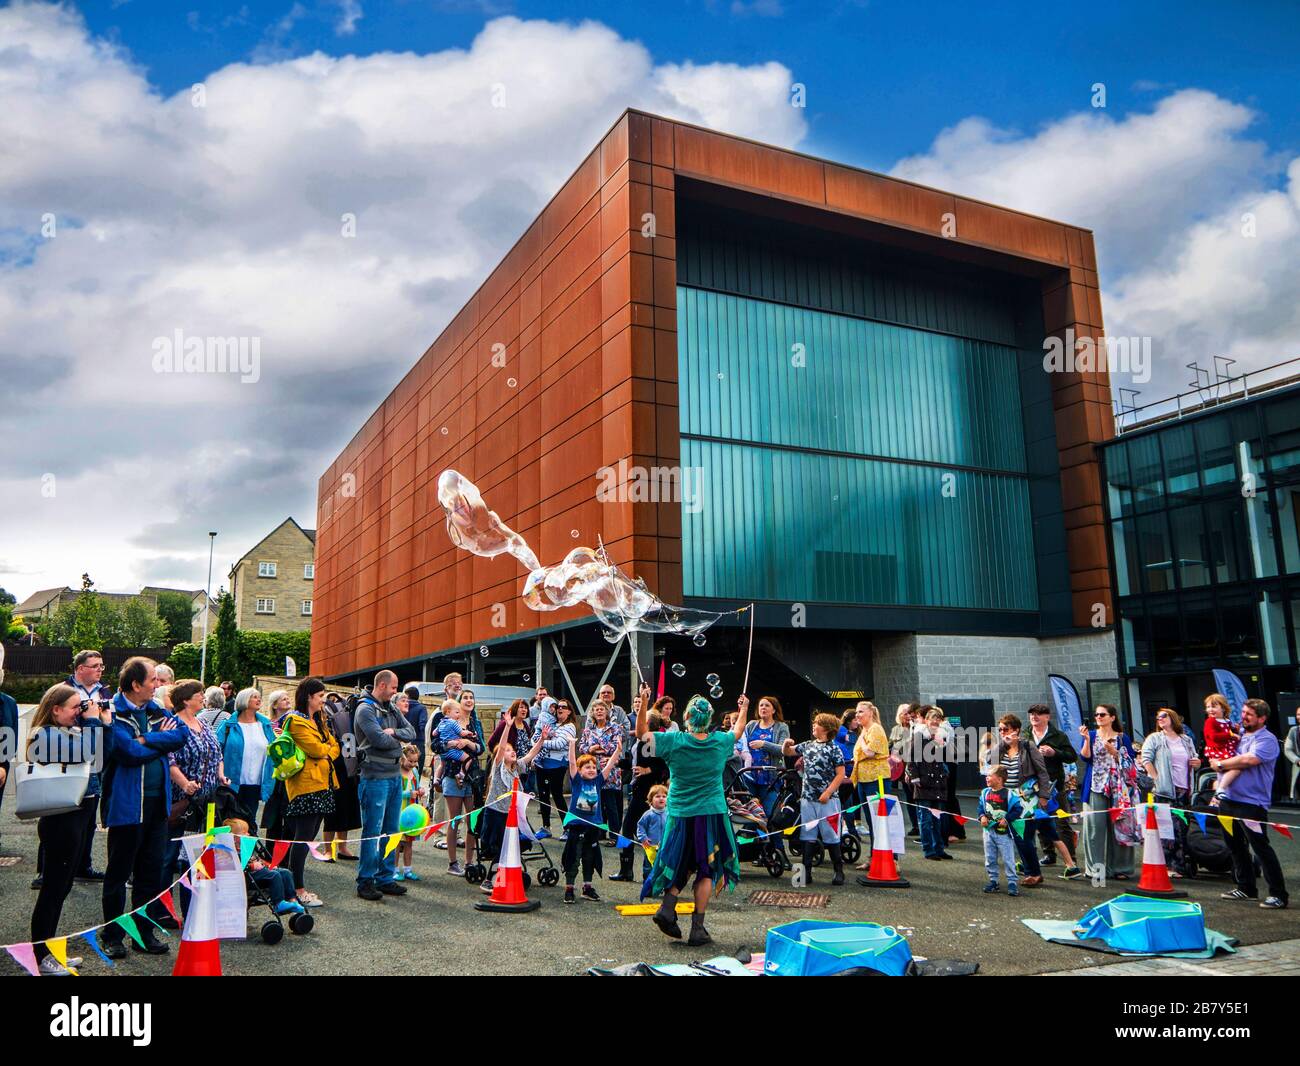 Magnificent display of Bubble Making at the celebration of the Leeds Liverpool Canal at Burnley Lancashire Stock Photo